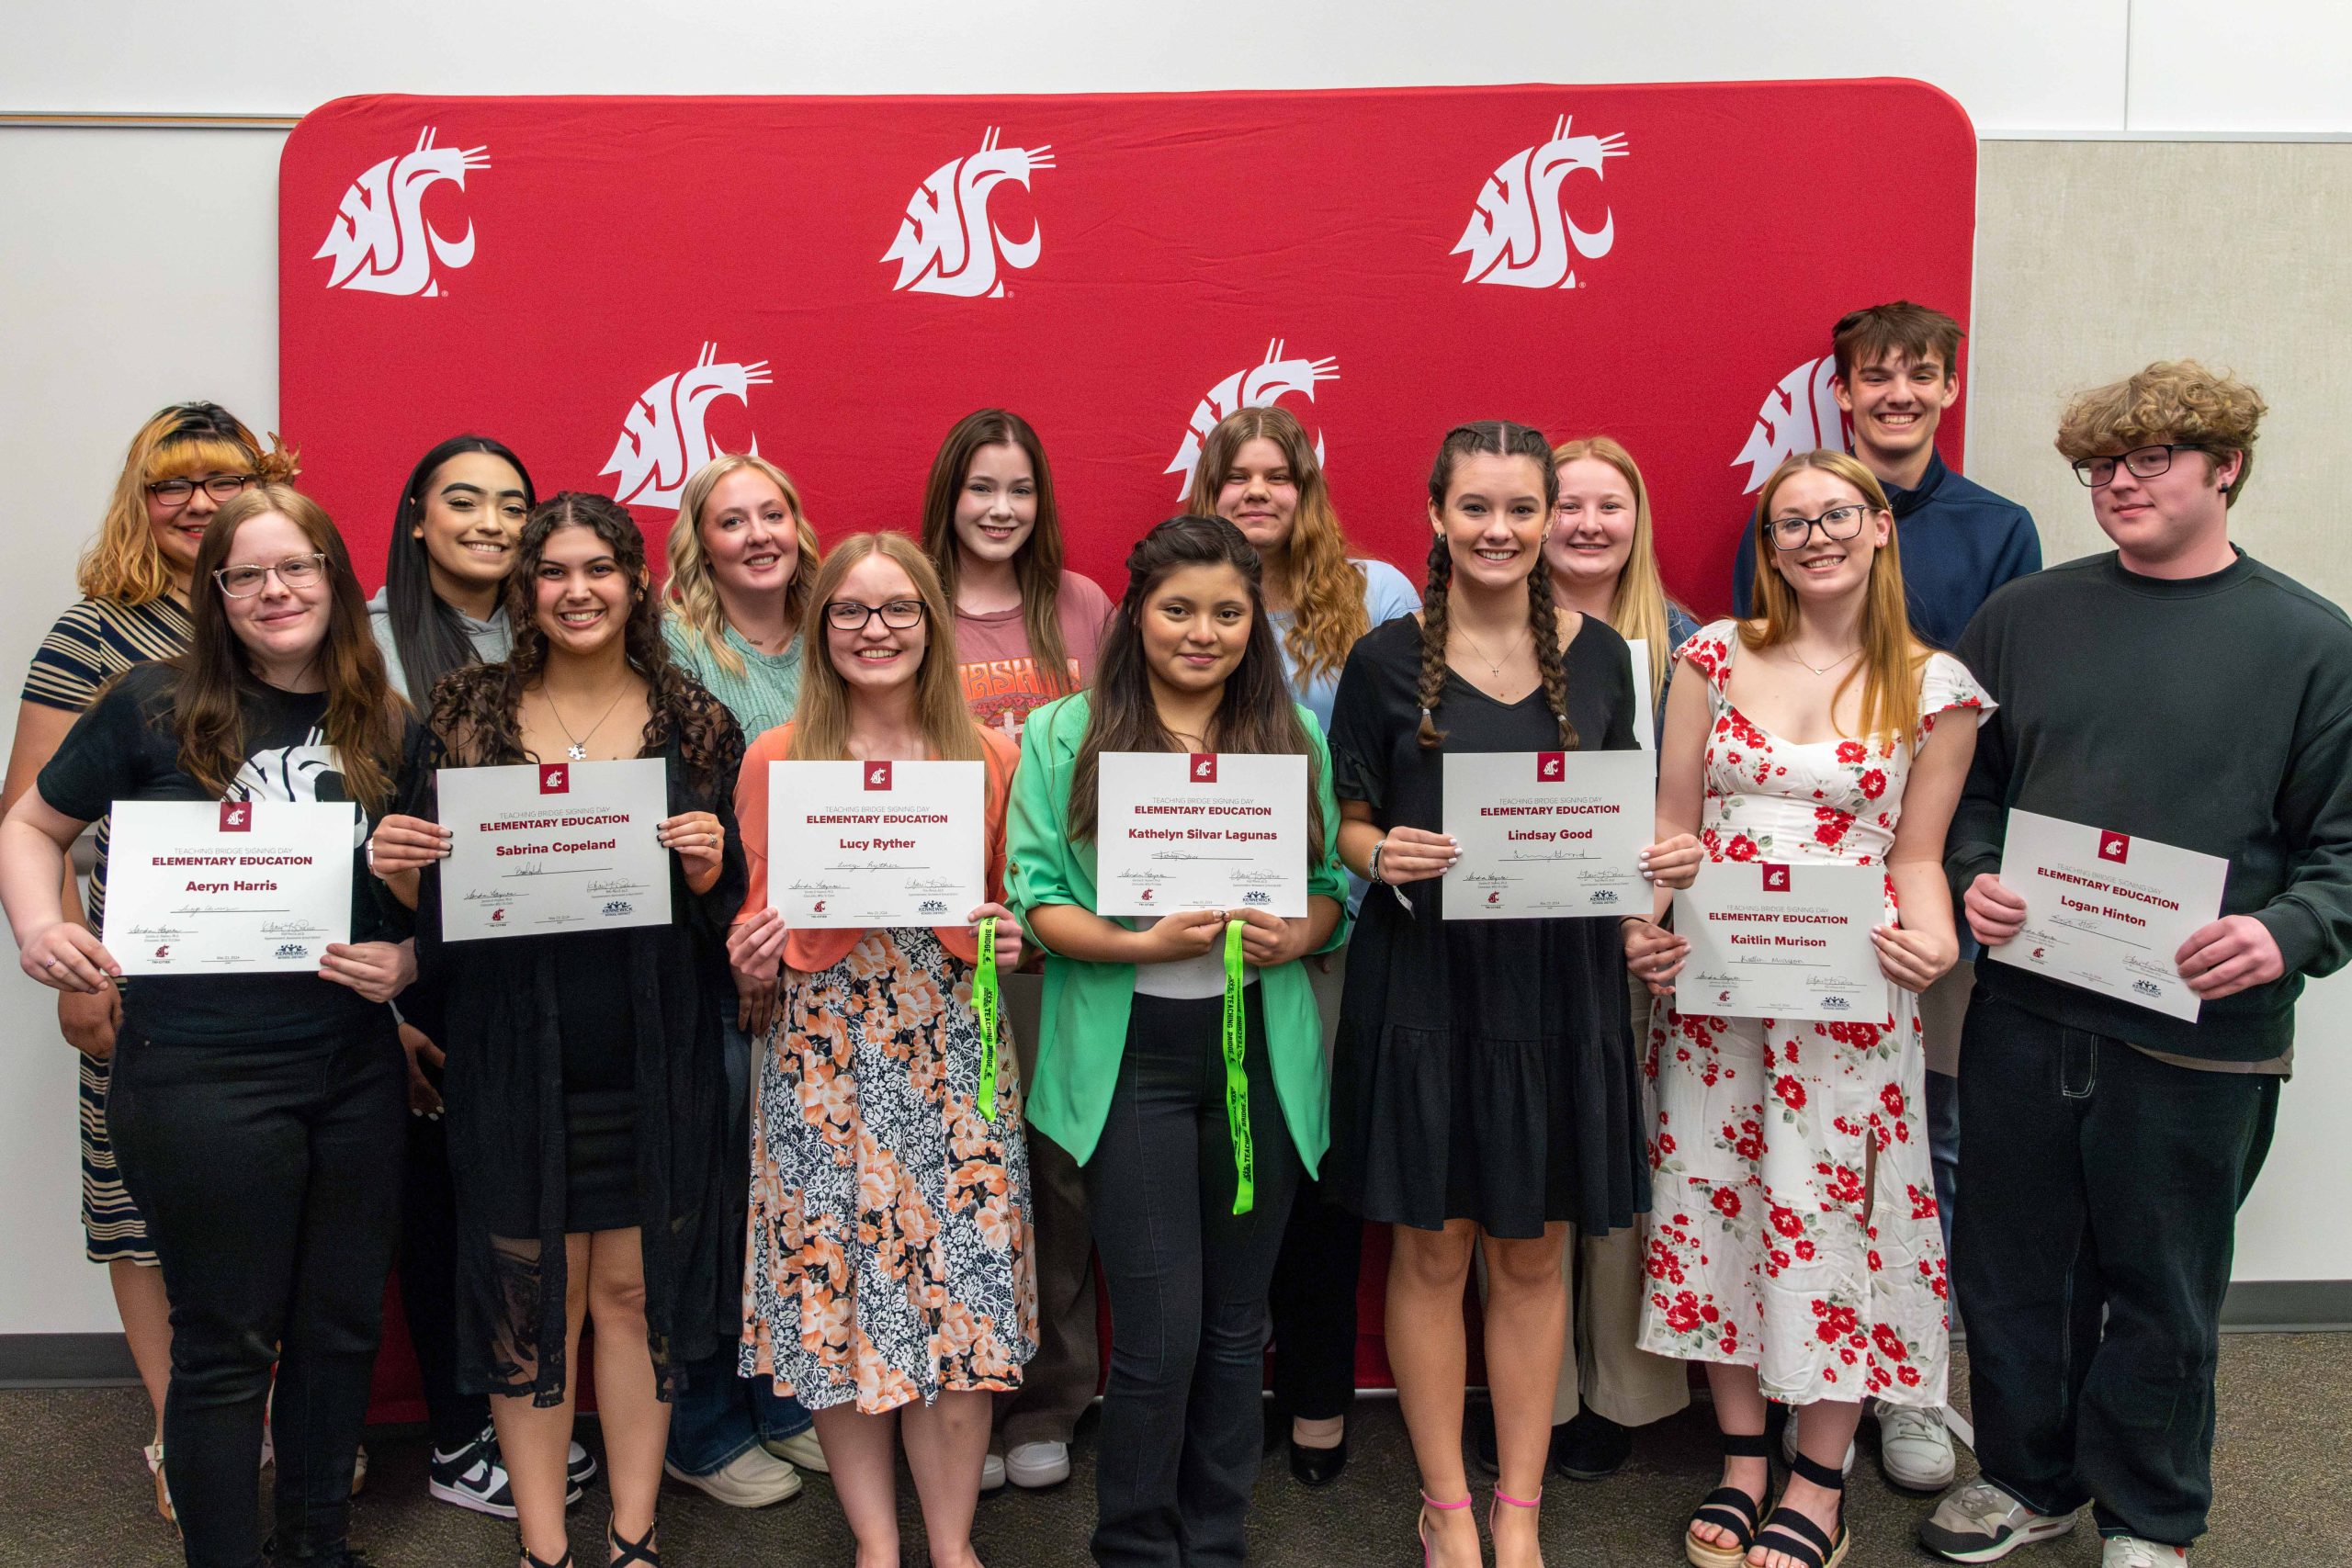 14 Kennewick school district students posing with certificates for a group photo in front of a crimson backdrop with white Coug heads